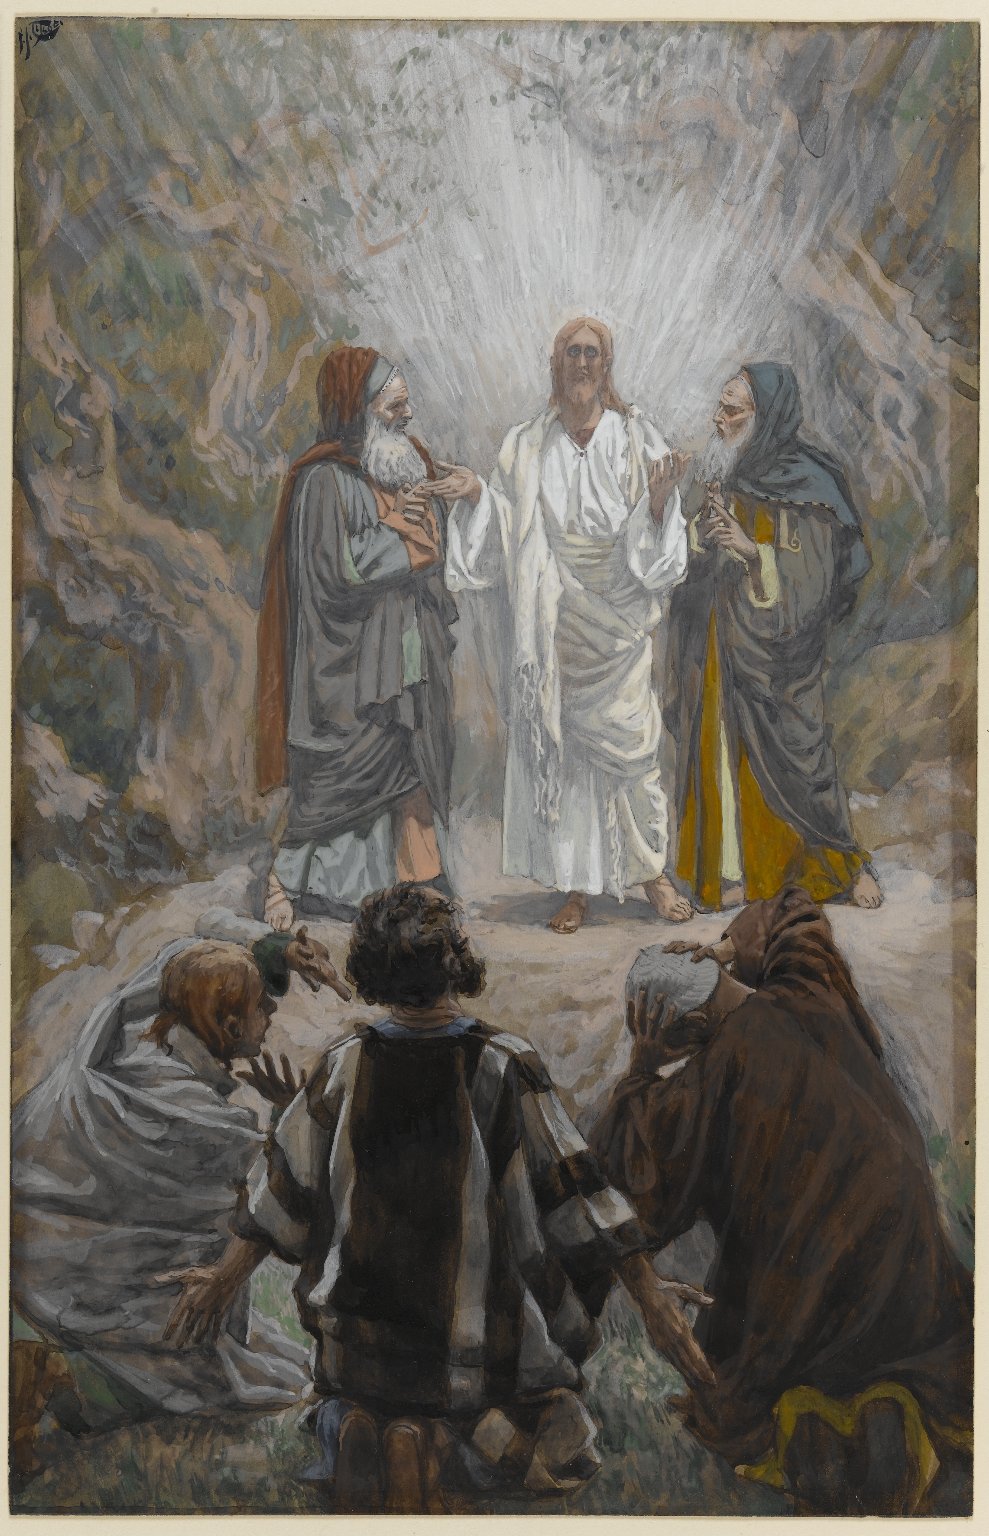 Second Sunday of Lent – March 5, 2023